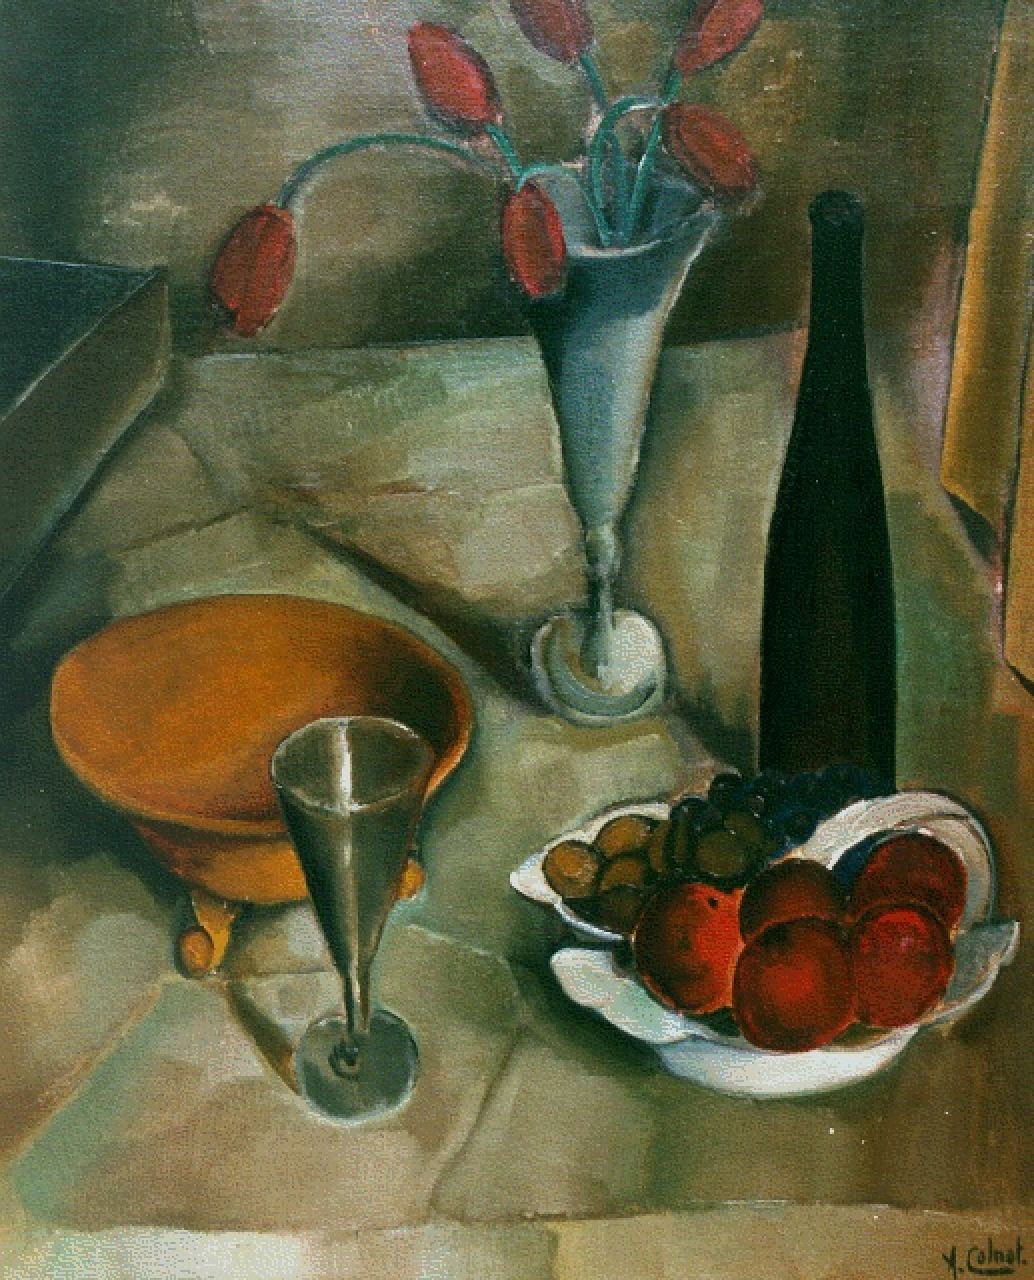 Colnot A.J.G.  | 'Arnout' Jacobus Gustaaf Colnot, A still life with bottle and fruit, oil on canvas 76.5 x 64.4 cm, signed l.r.